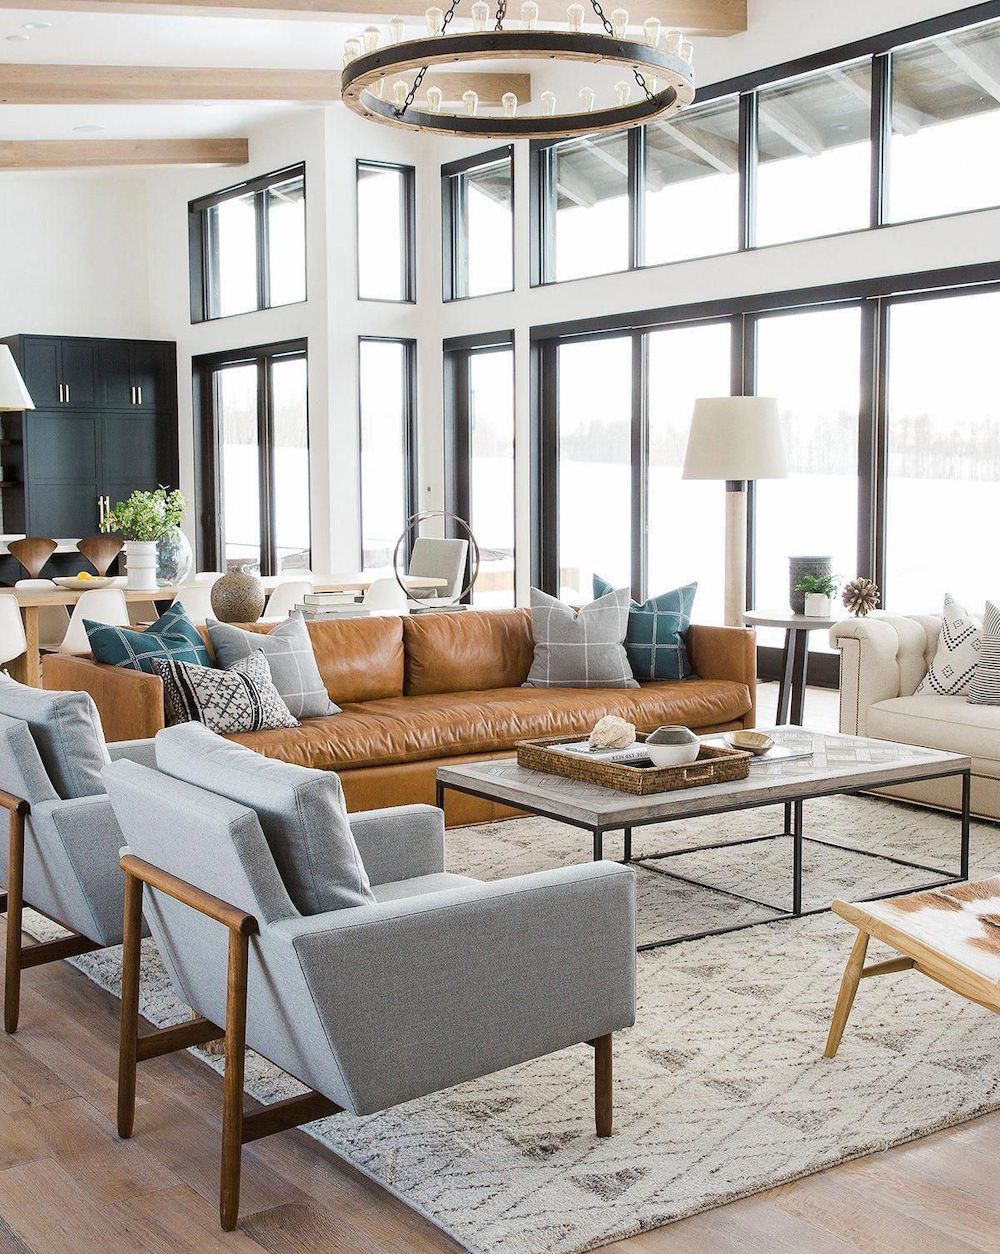 Mismatched Sofas - Good Idea, Or A Colossal Mistake? - Laurel Home